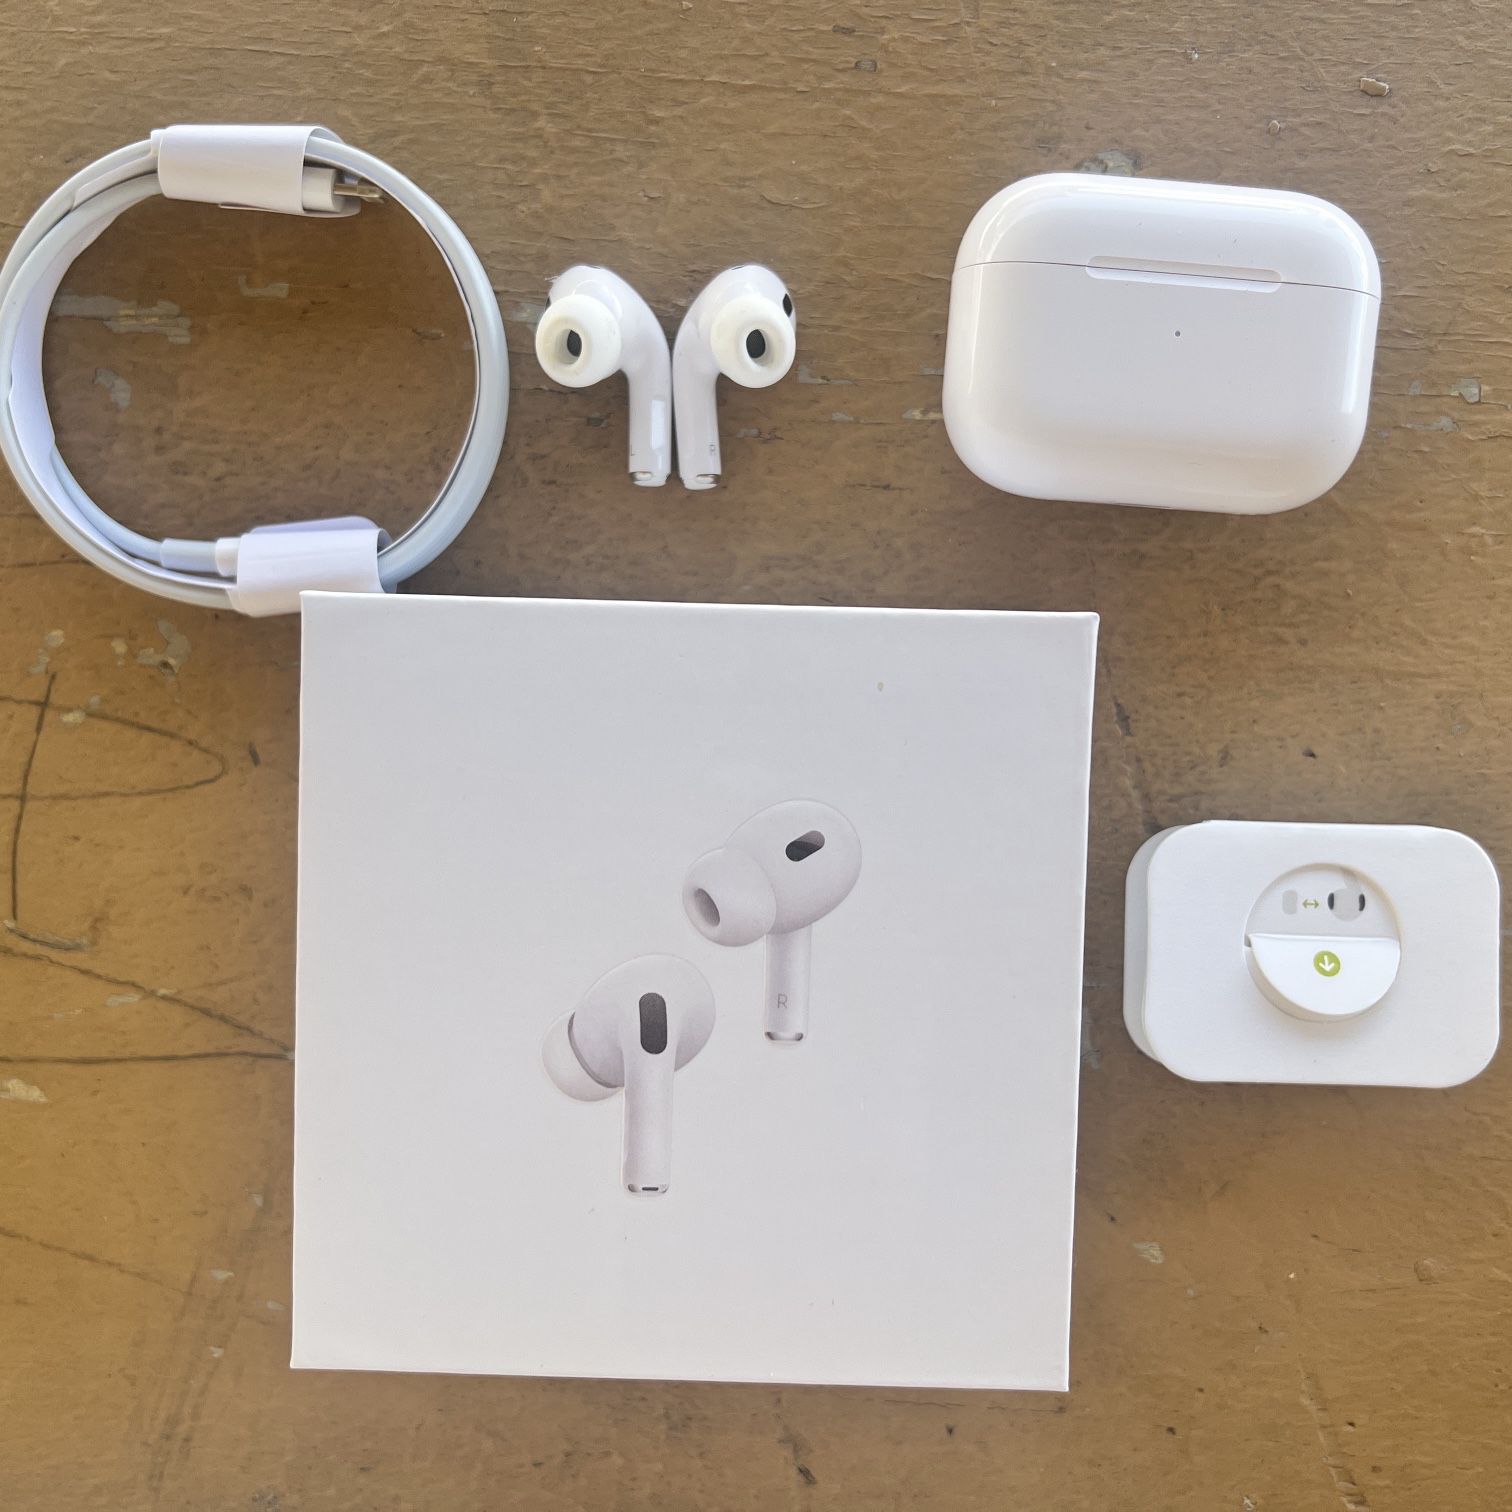 AirPods New In Box (2nd Gen) 